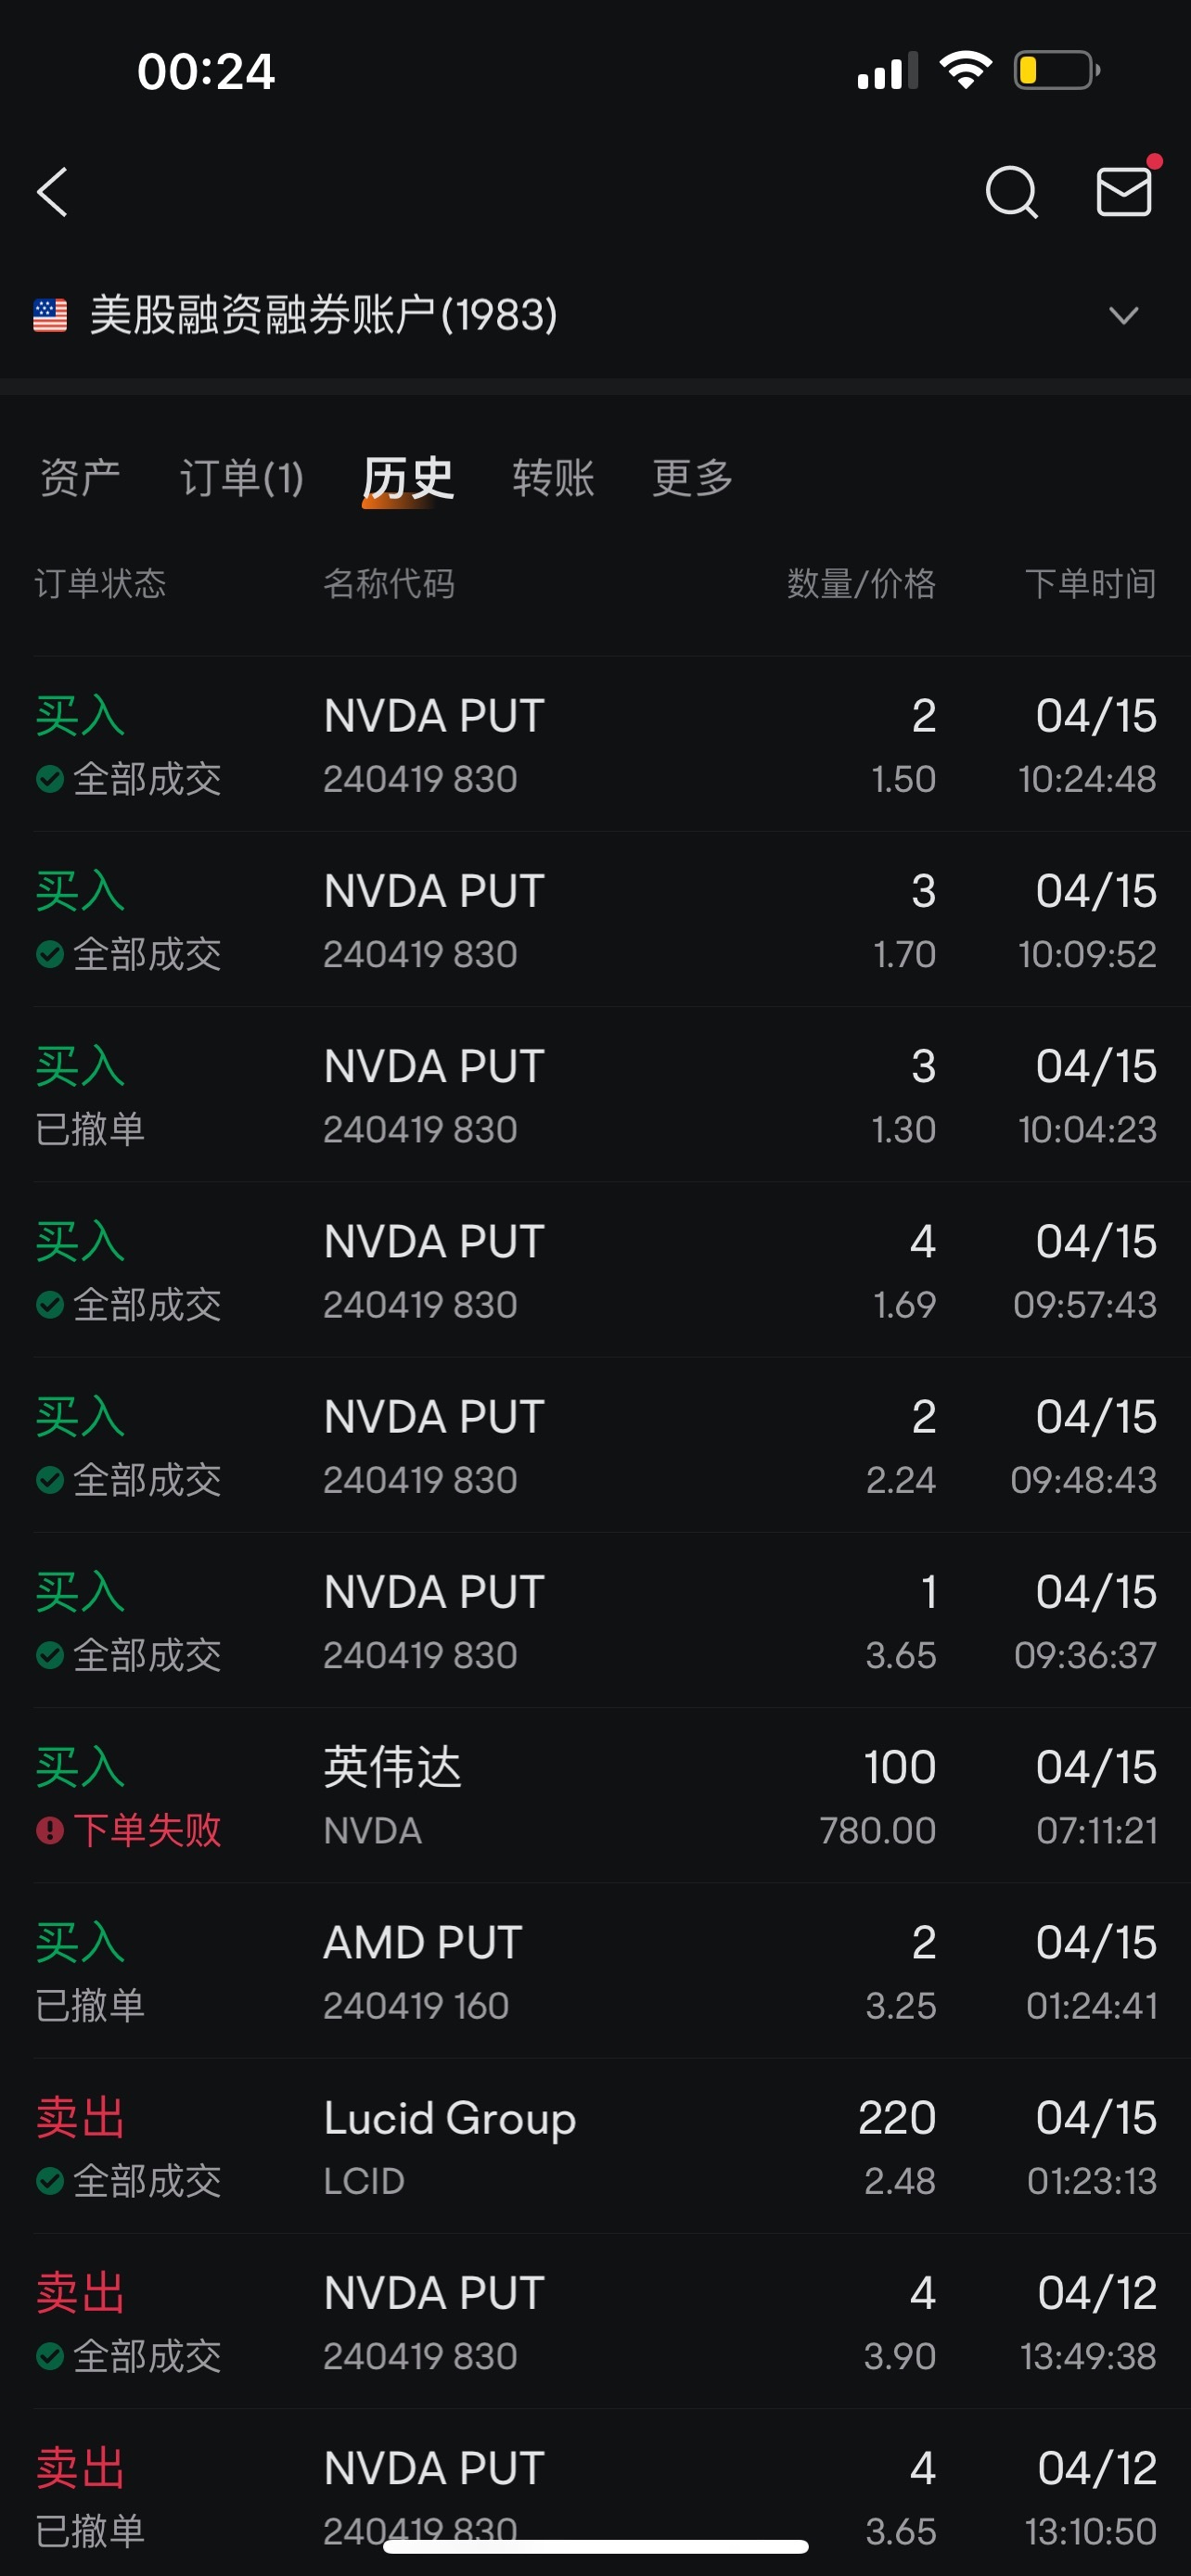 $NVIDIA (NVDA.US)$  Entered the market on April 15 and opened a one-sided put ☺️